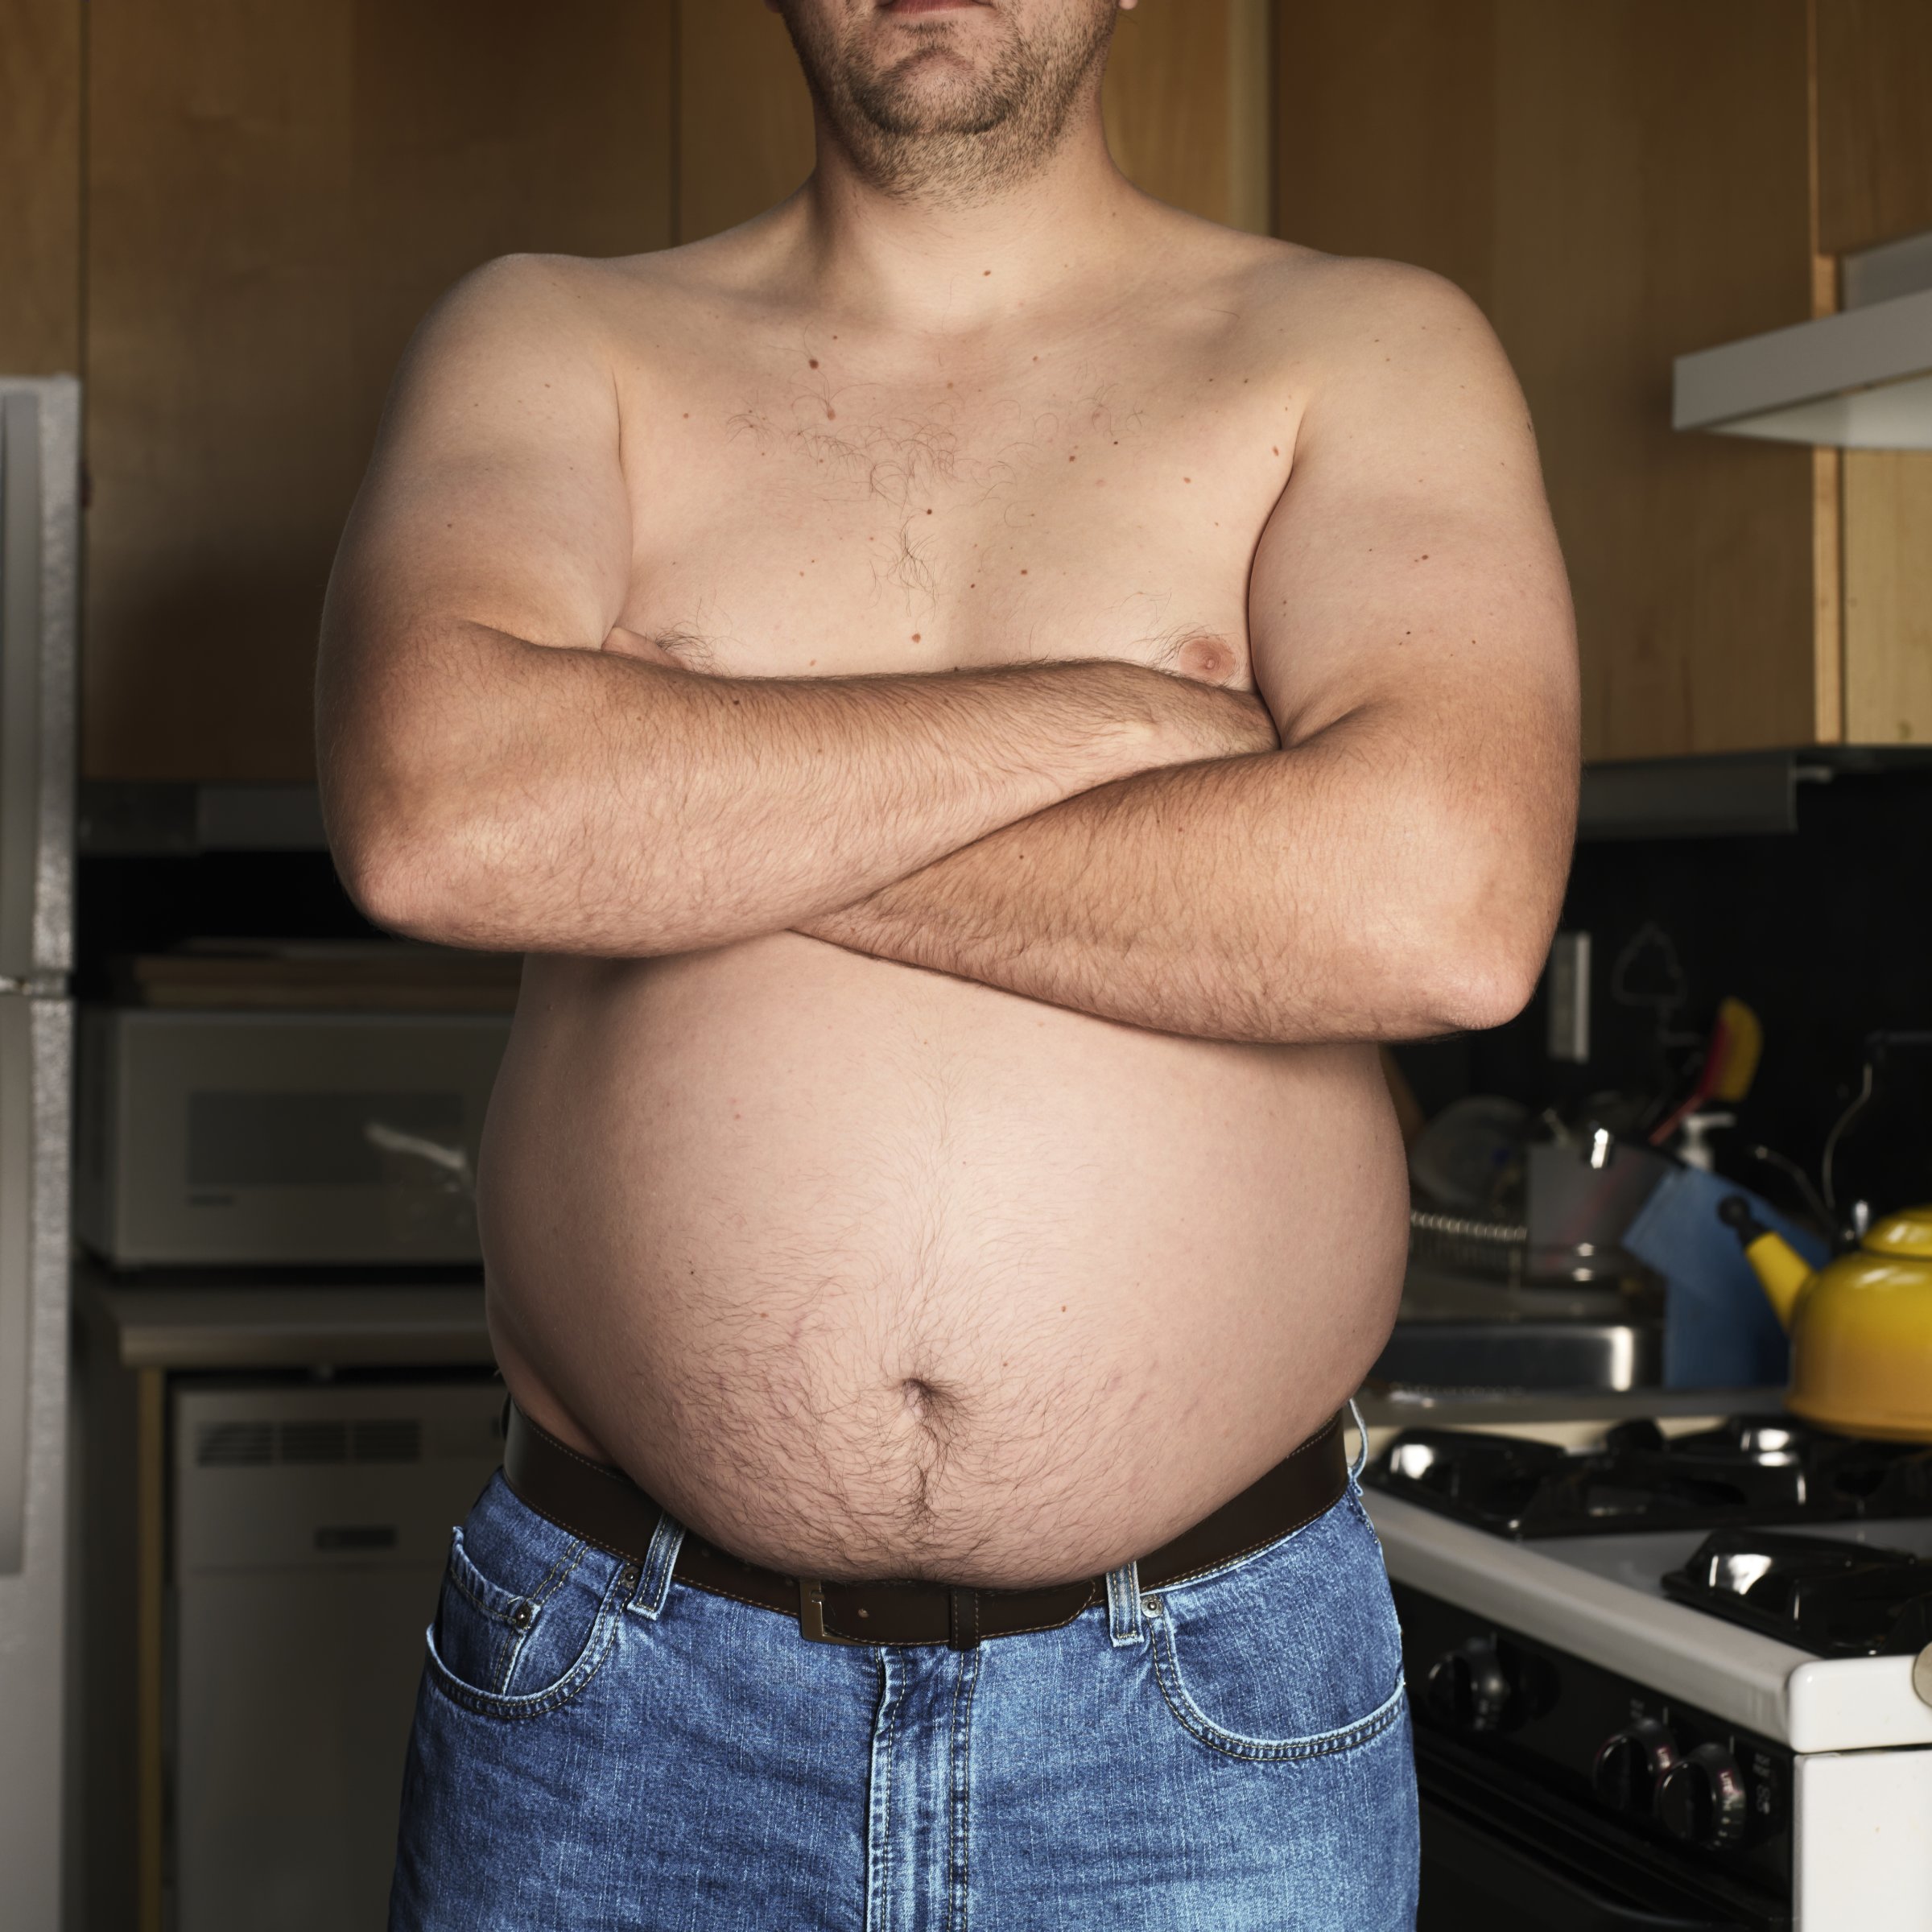 Shirtless man standing in kitchen with arms crossed, mid section, close-up